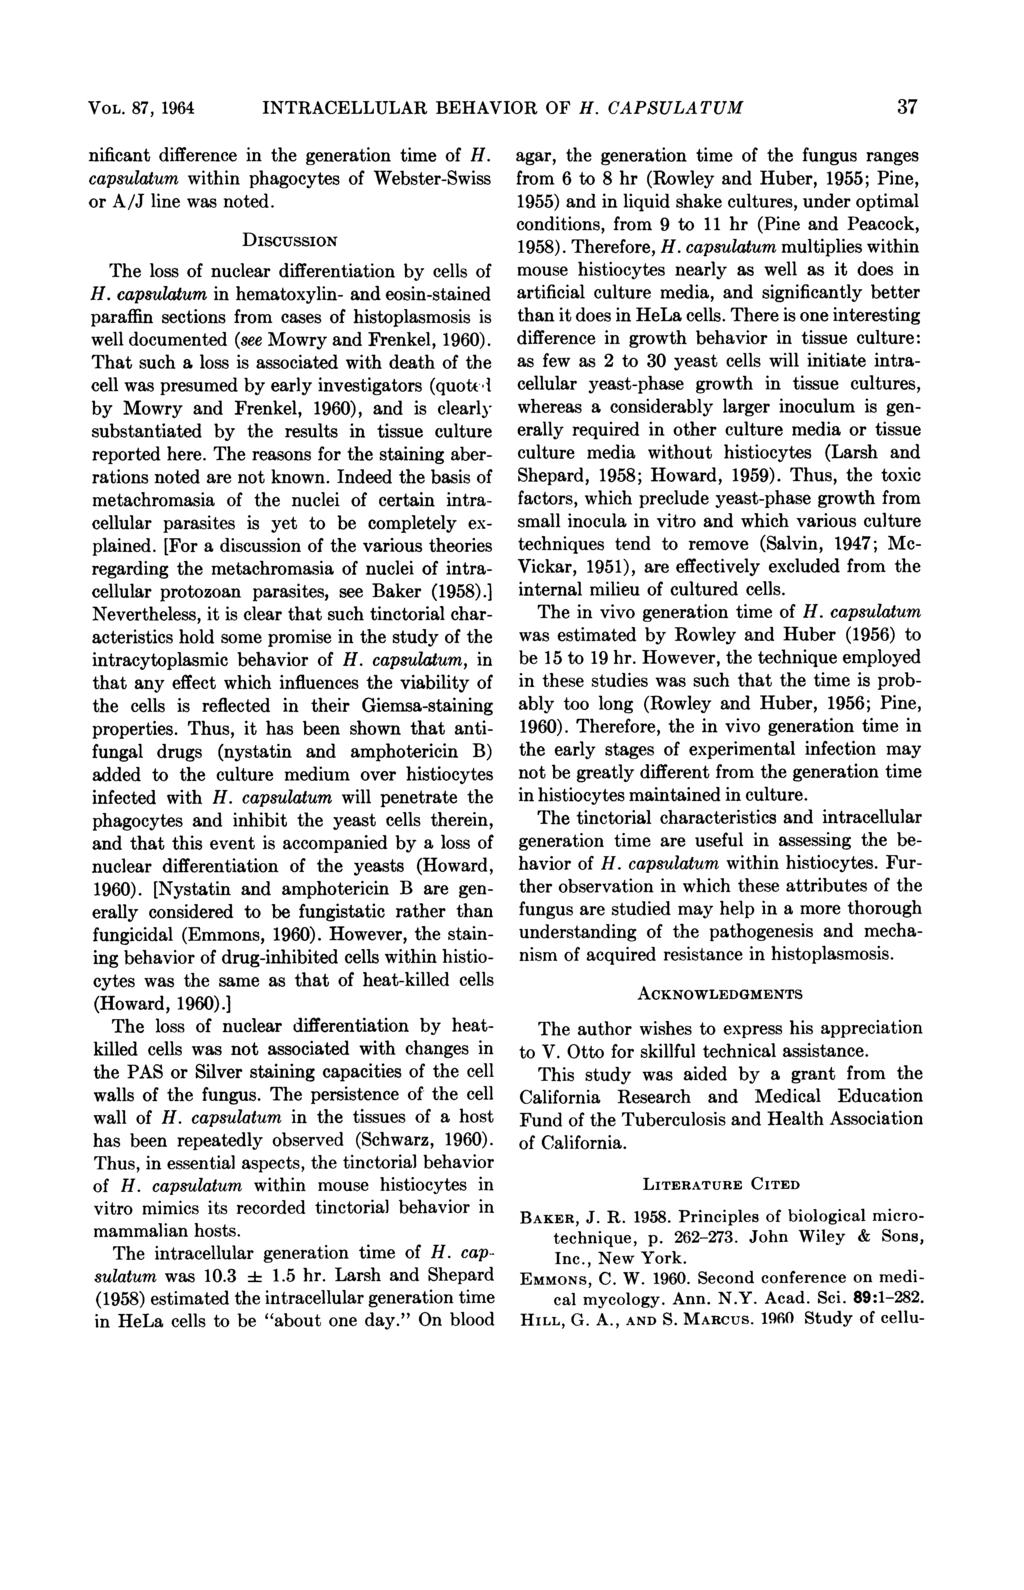 VOL. 87, 1964 INTRACELLULAR BEHAVIOR OF H. CAPSULATUM 37 nificant difference in the generation time of H. capsulatum within phagocytes of Webster-Swiss or A/J line was noted.